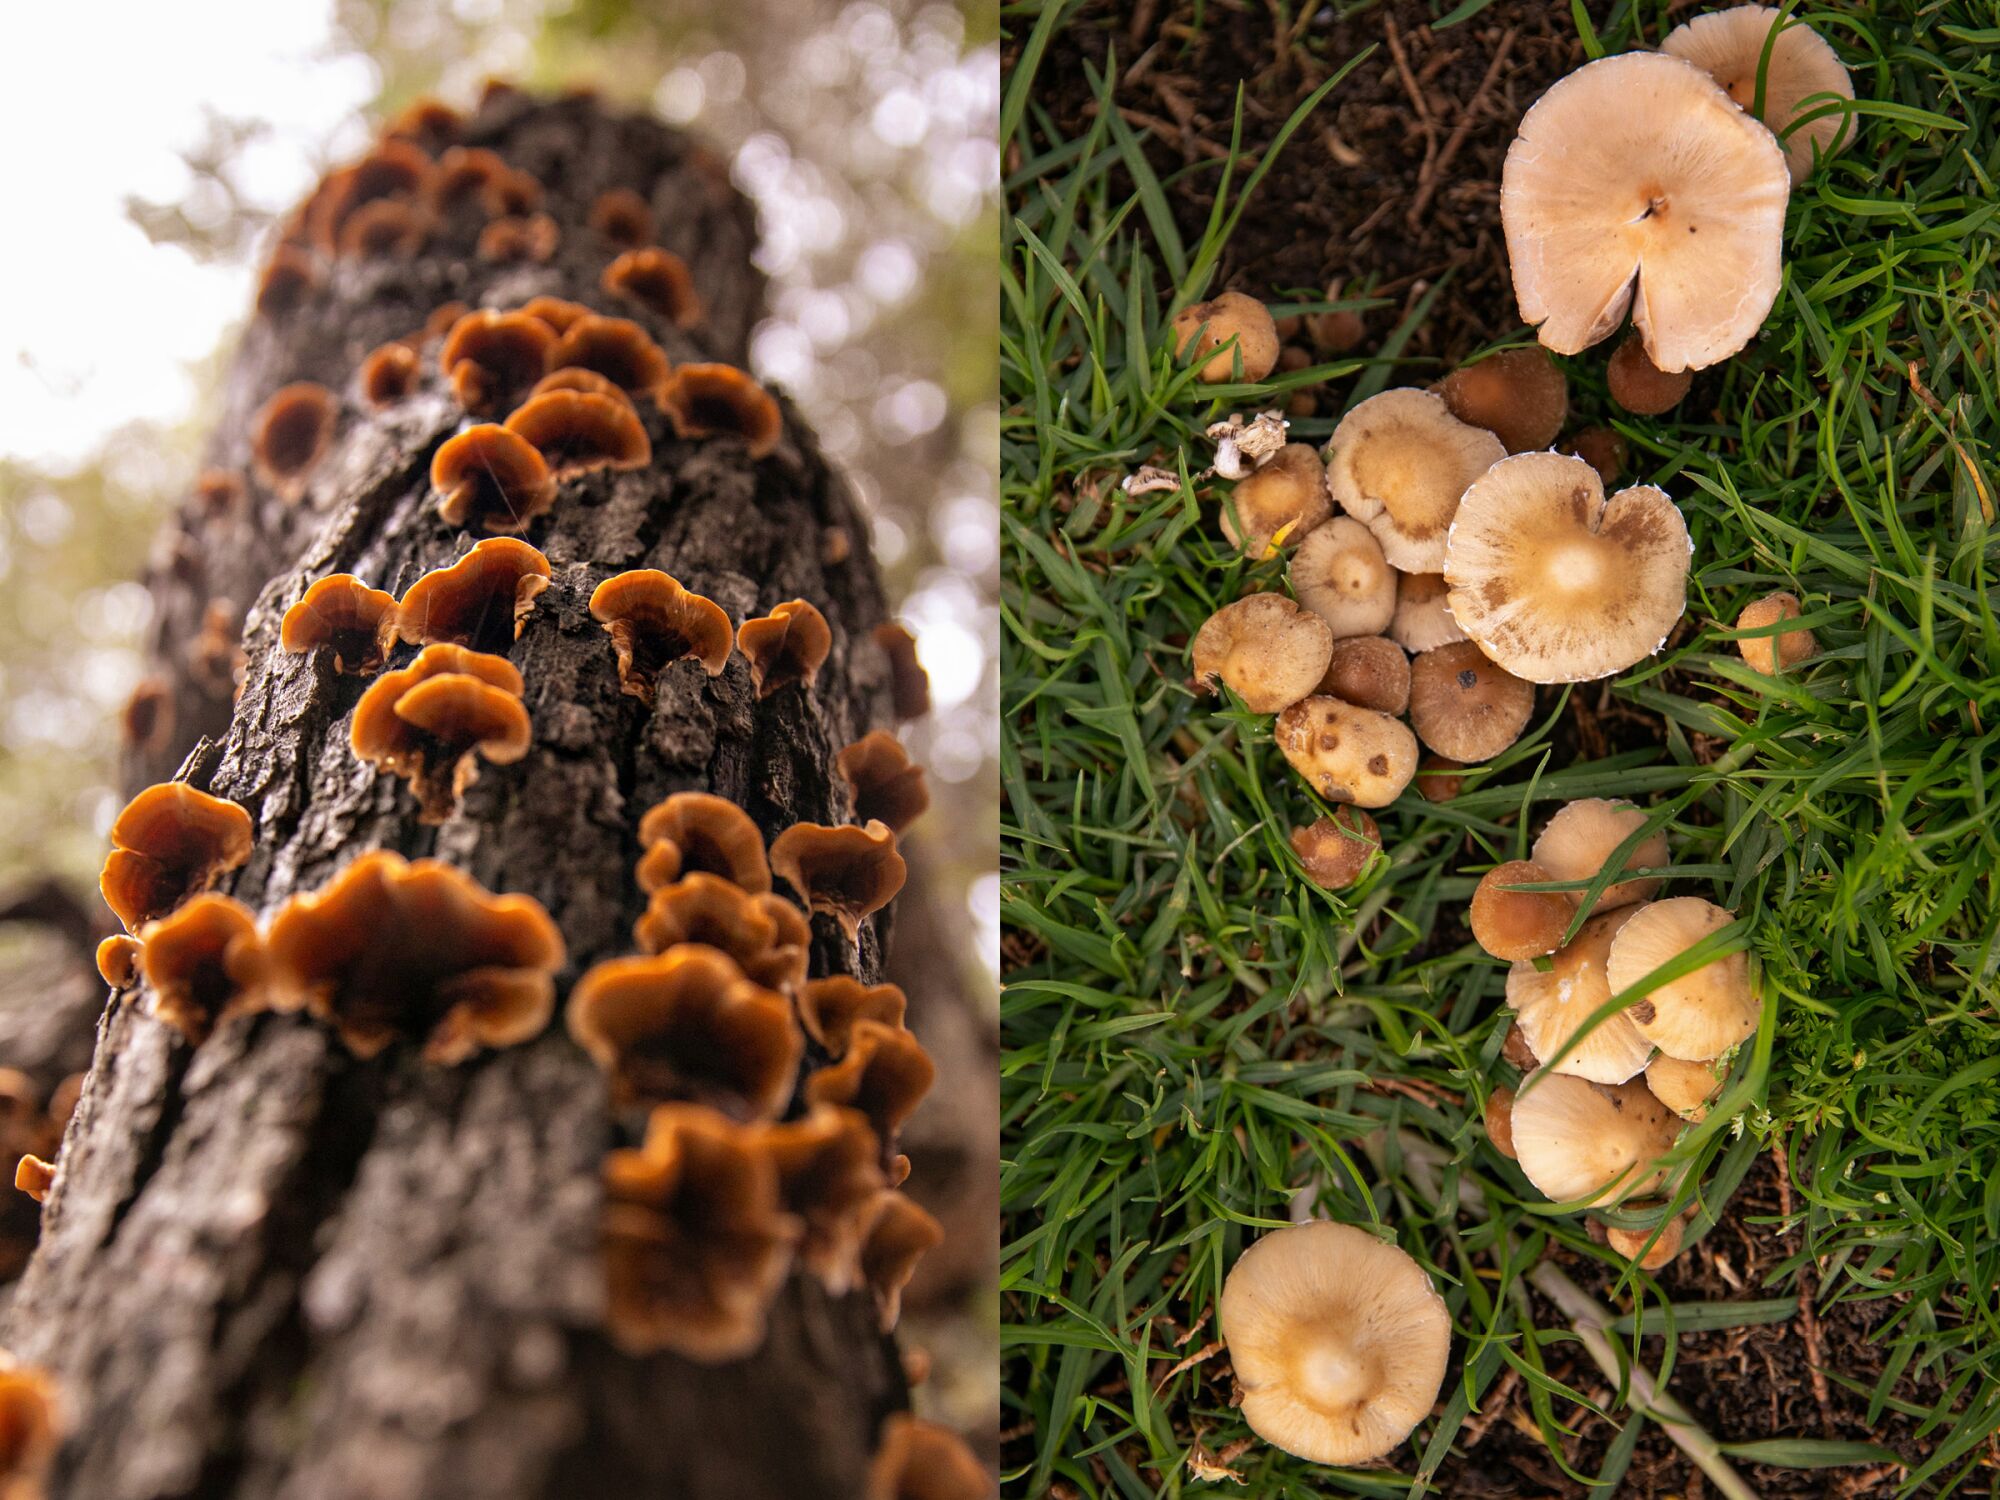 Side-by-side images of mushrooms growing on a tree and in grass